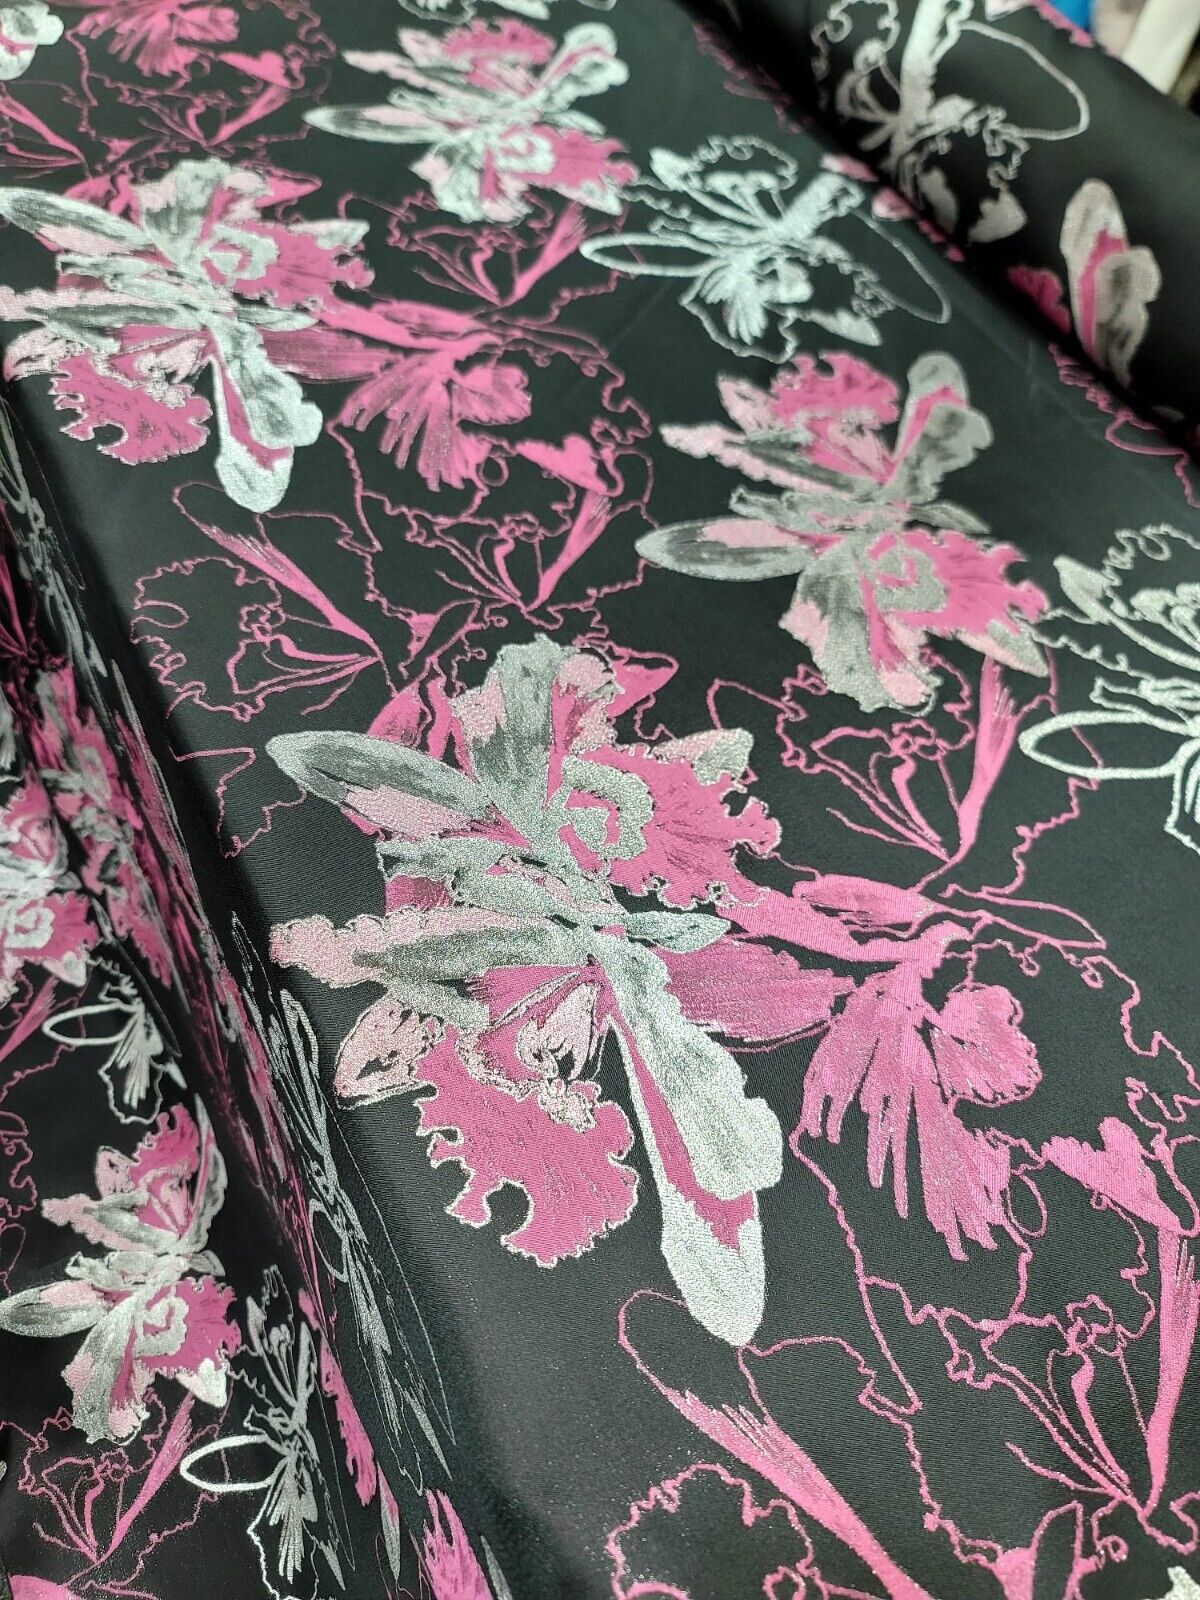 Pink Fuchsia Silver and Black Damask Jacquard Brocade Floral Fabric - 60" Width